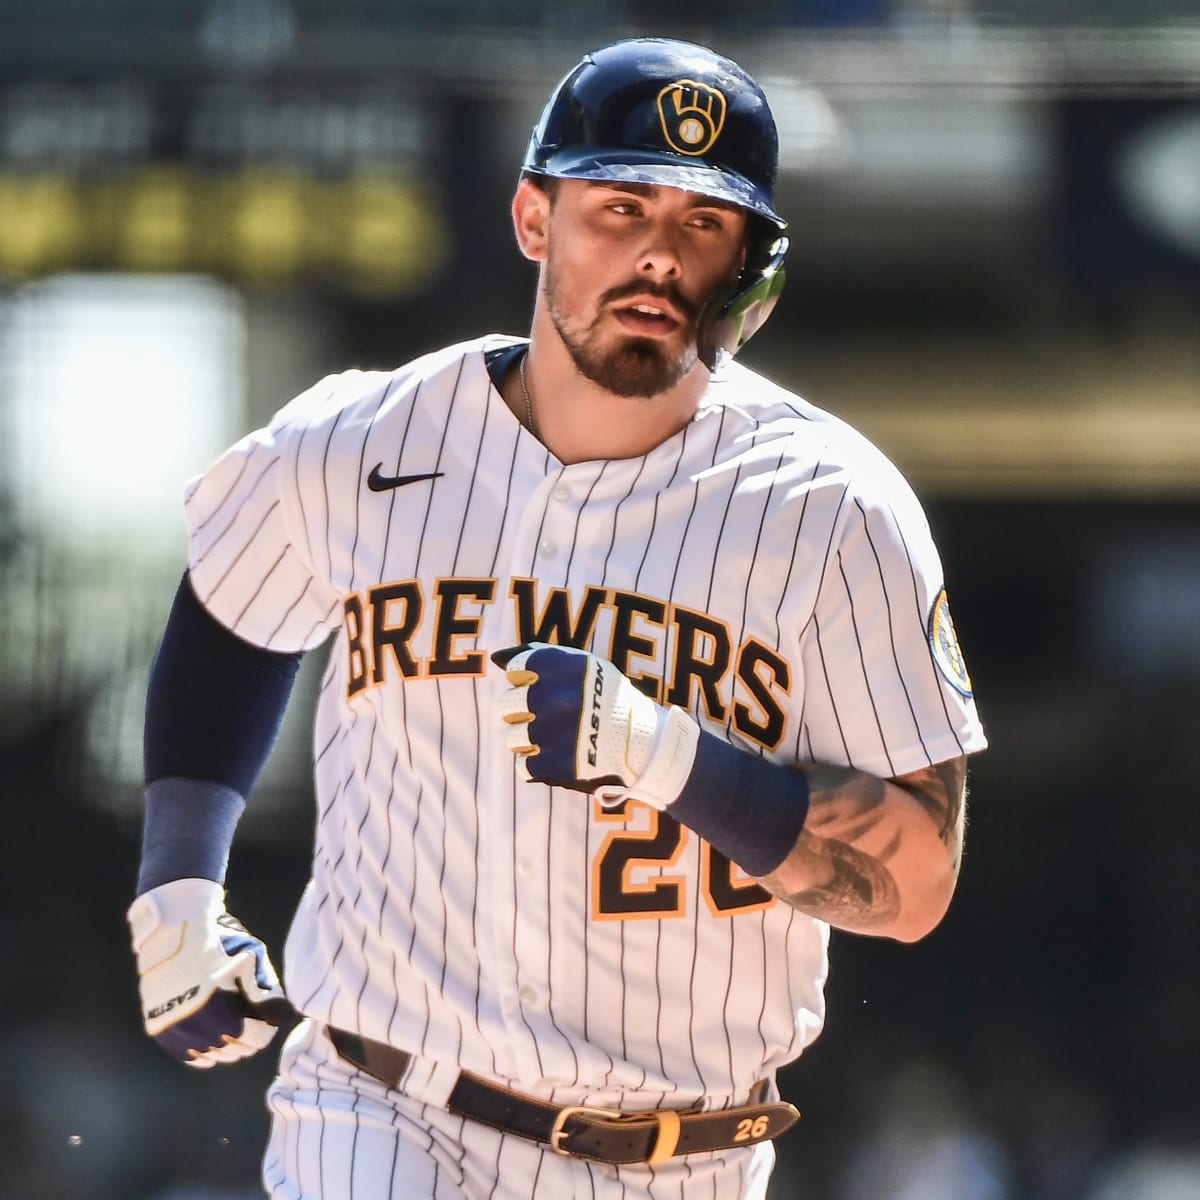 SF Giants acquire former Brewers catcher in trade with Mariners